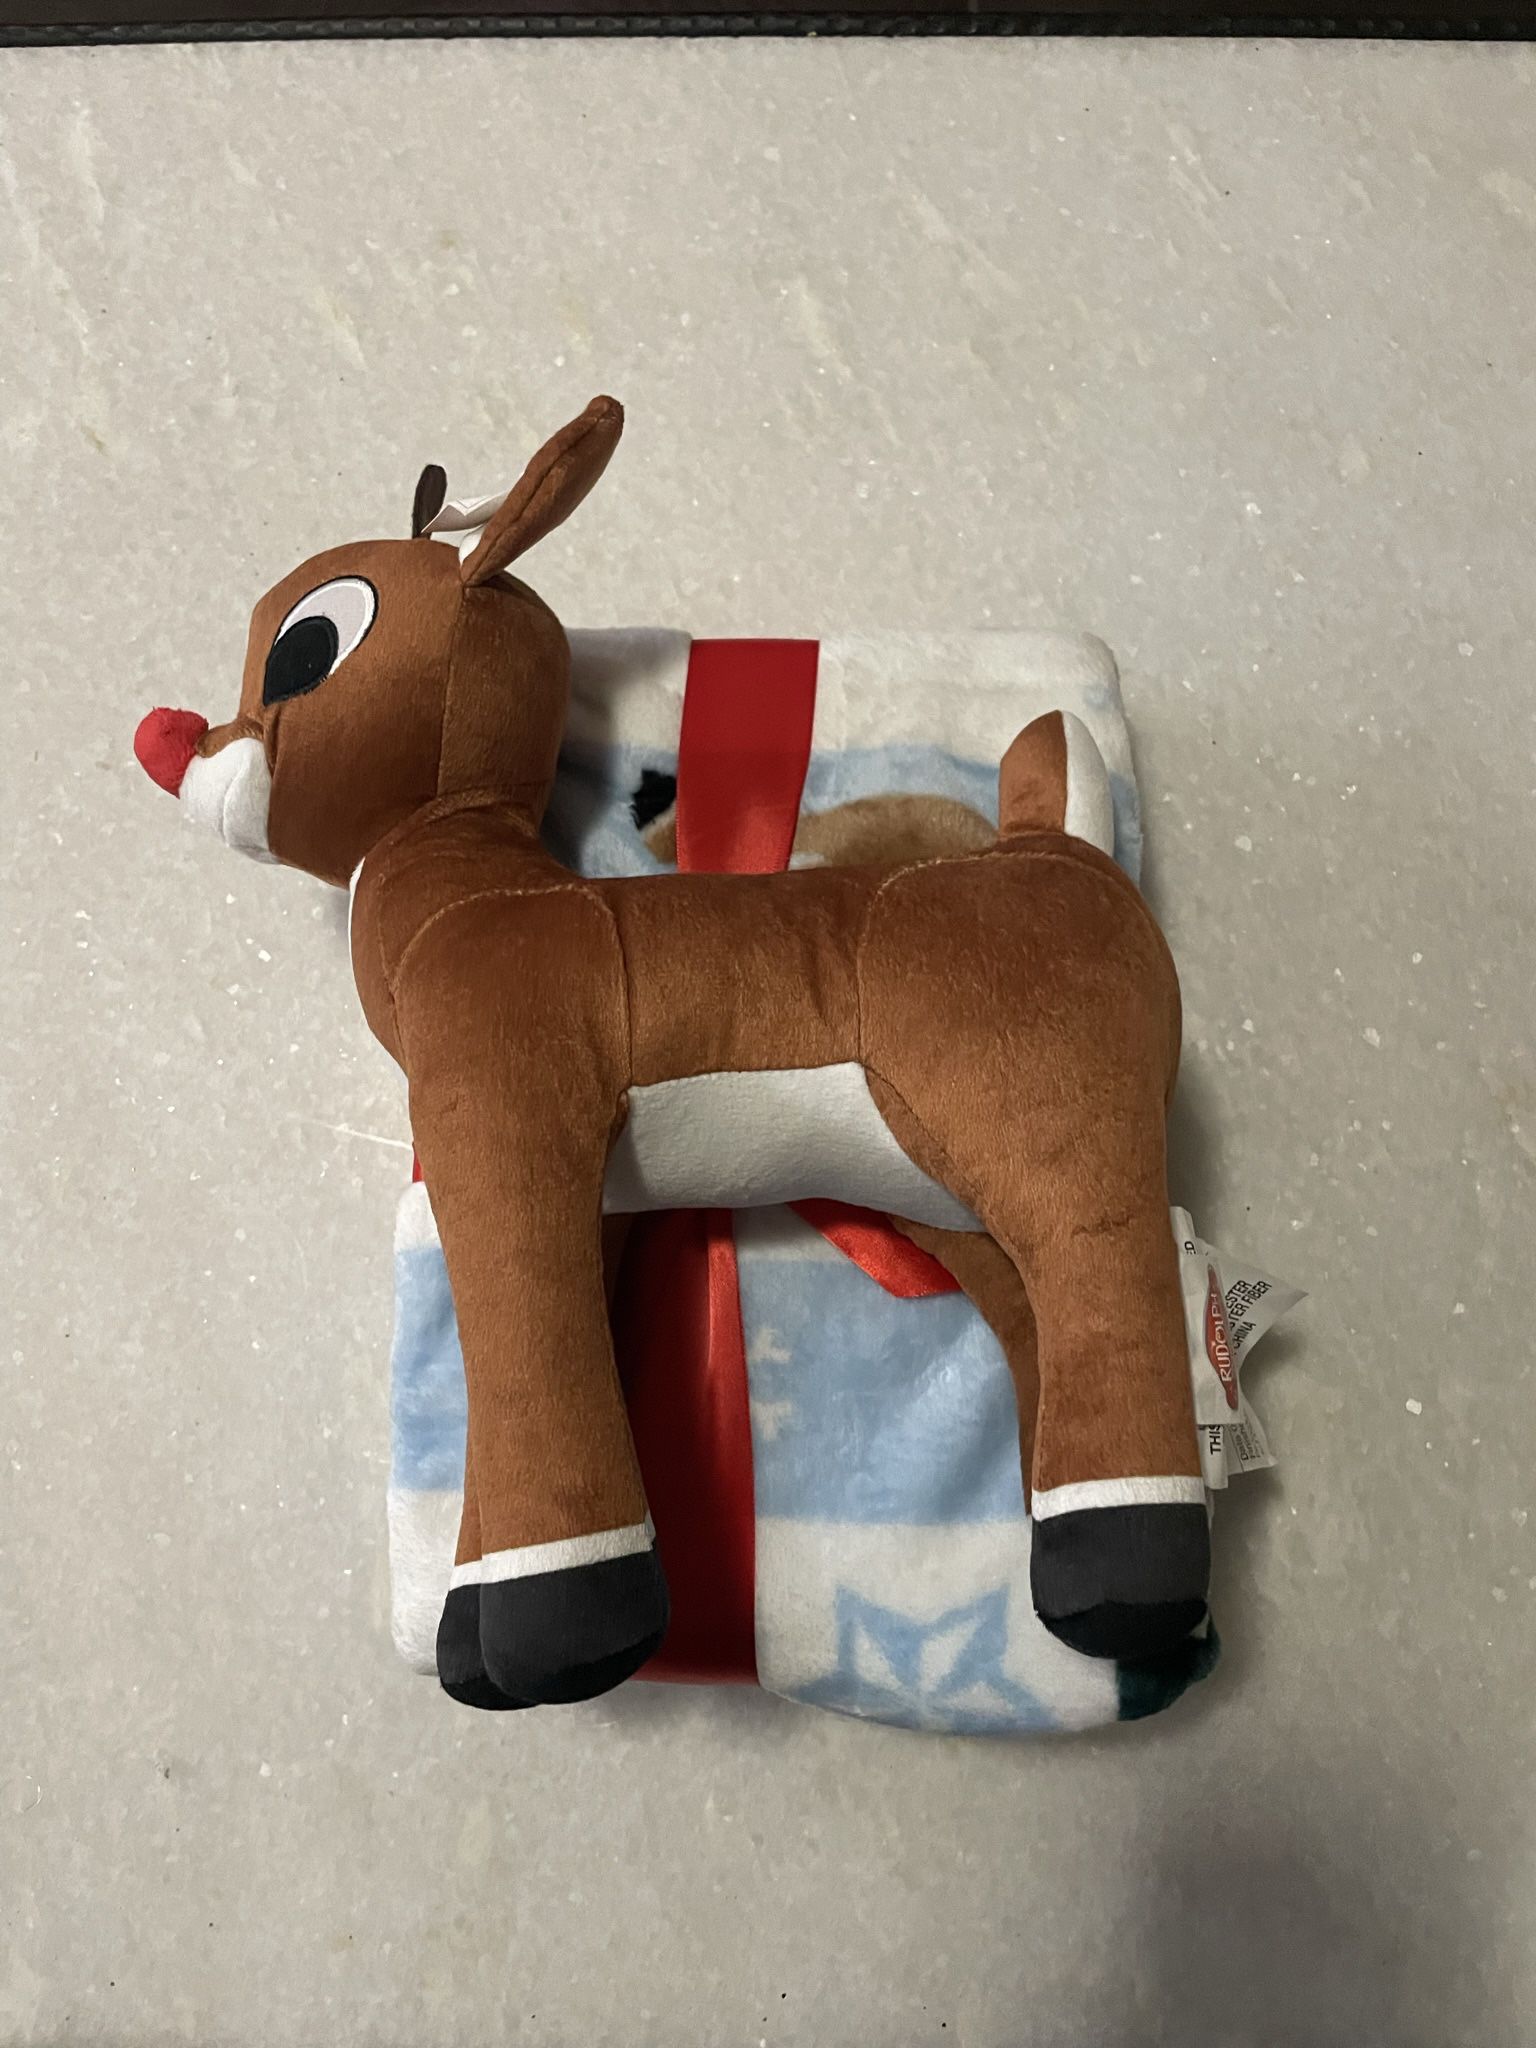 brand new rudolph plush and throw blanket set 